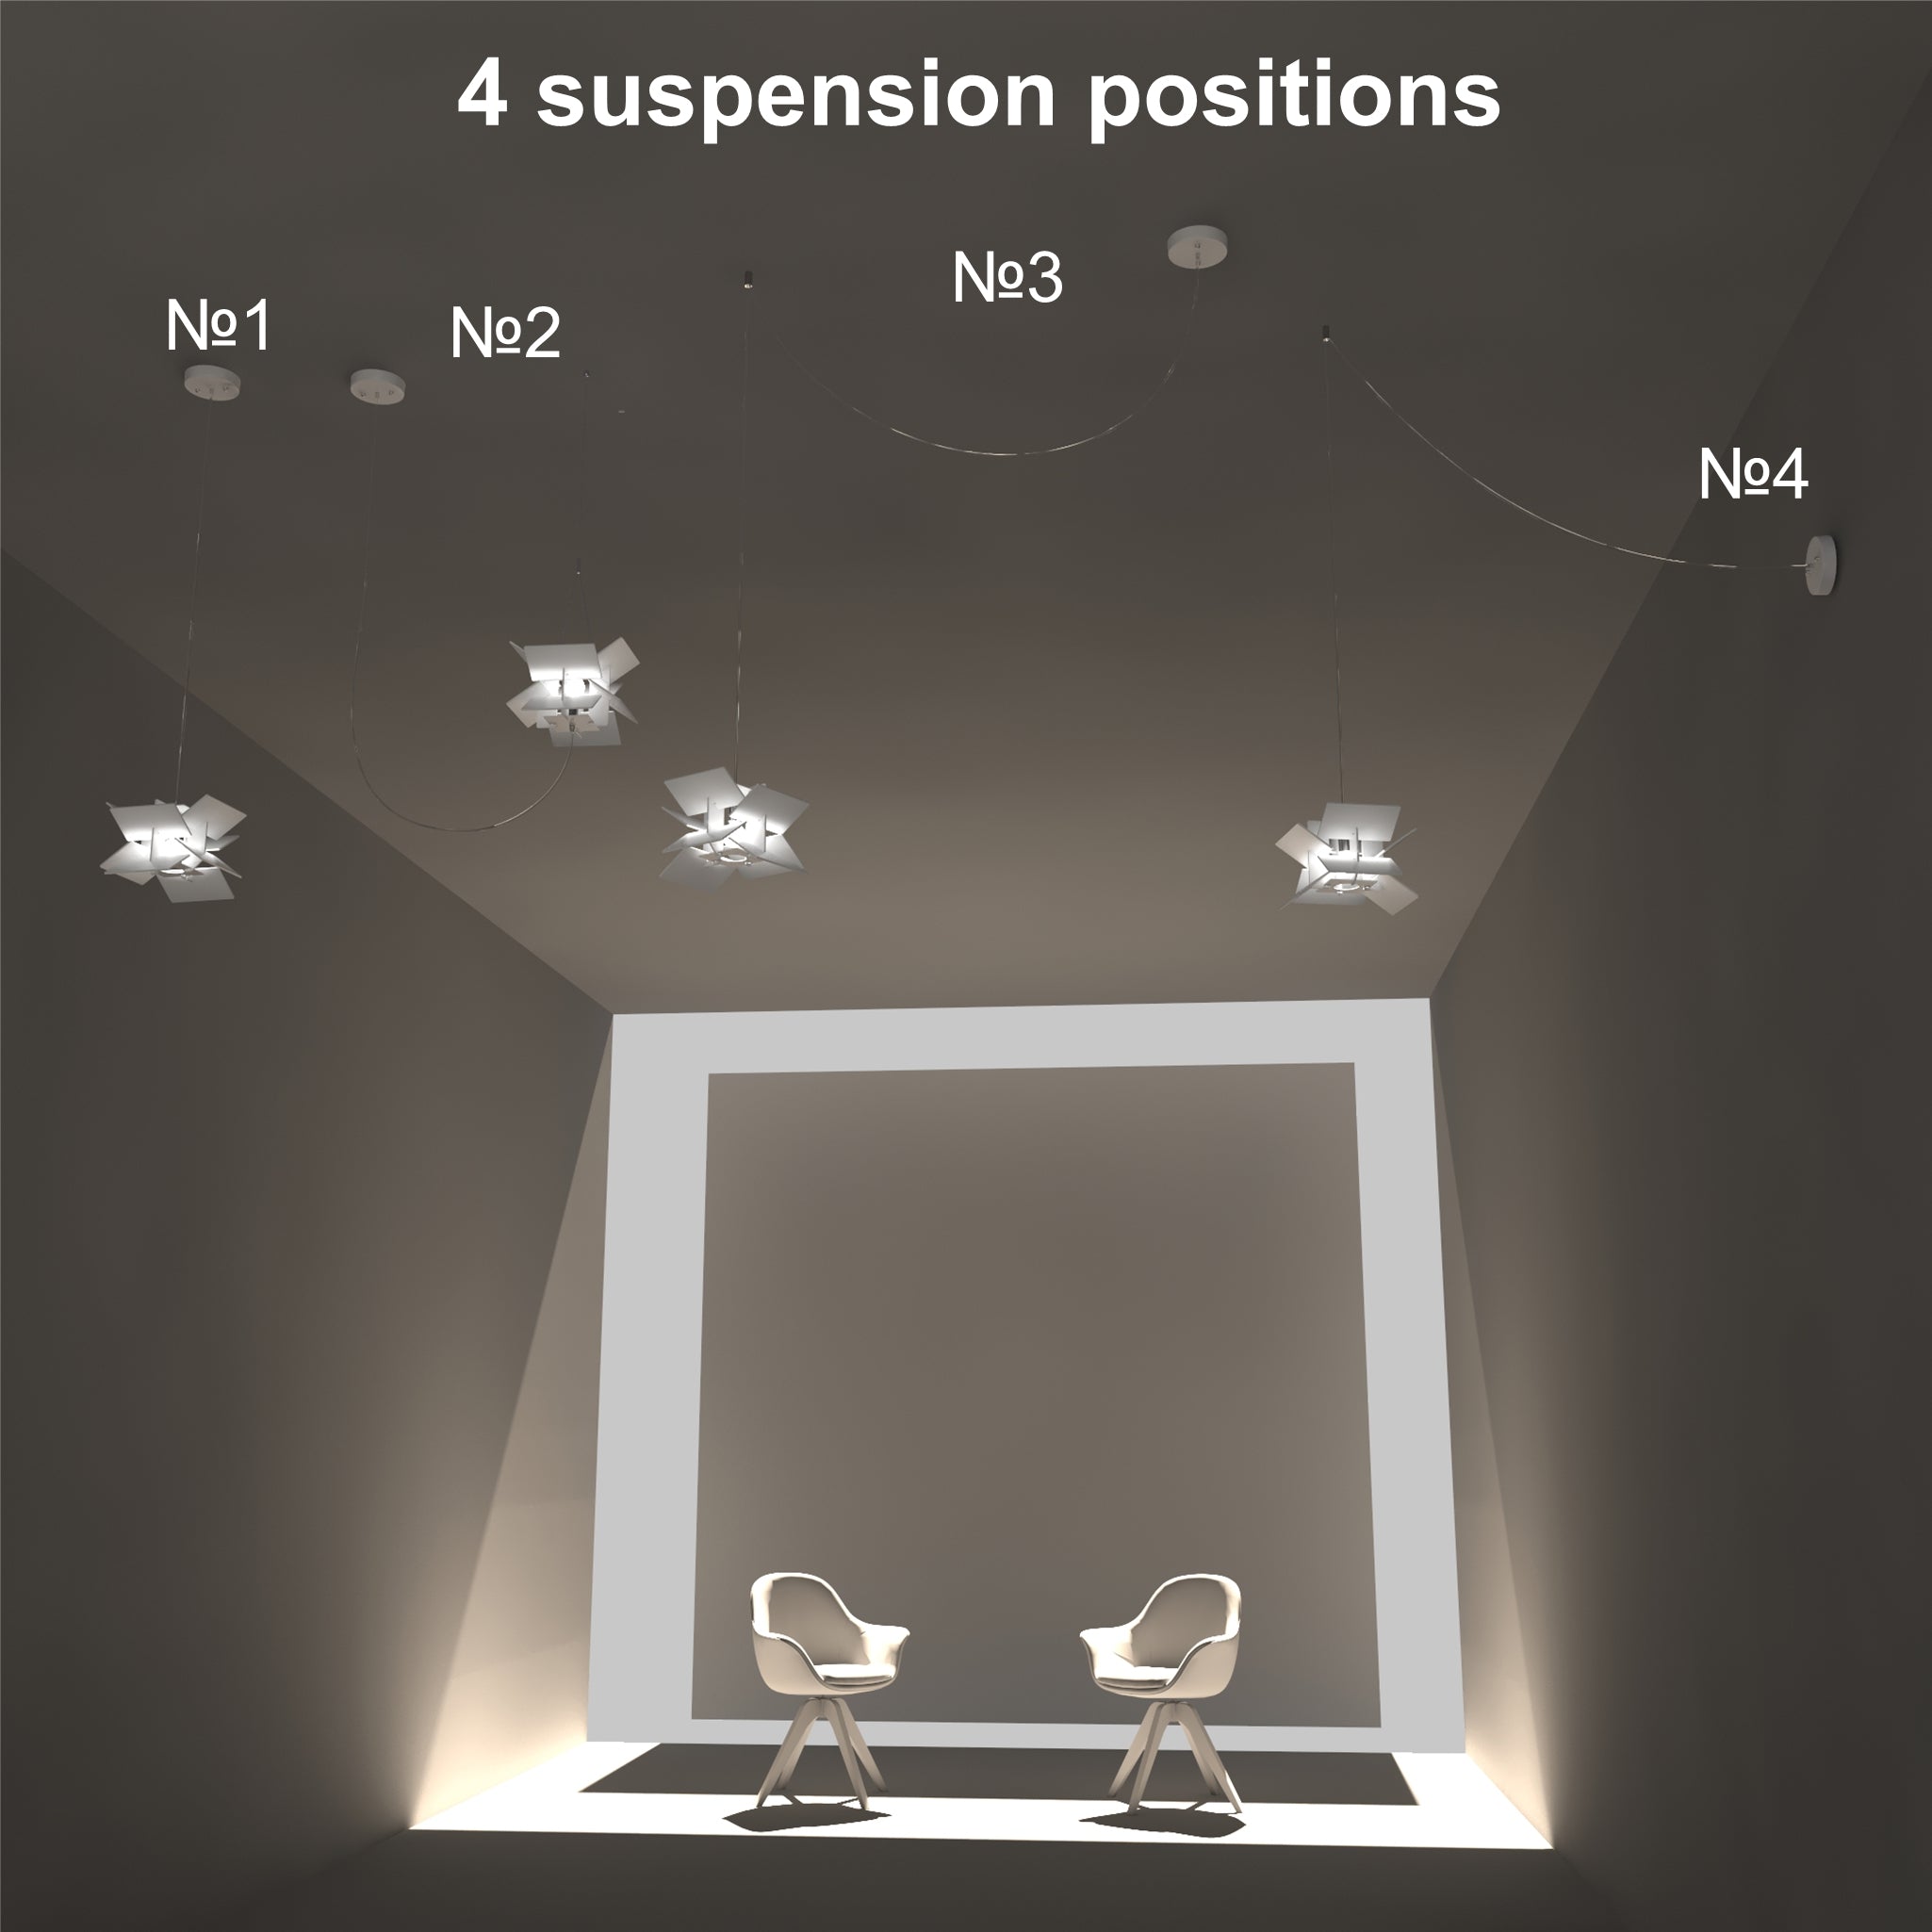 Top lights position for suspending